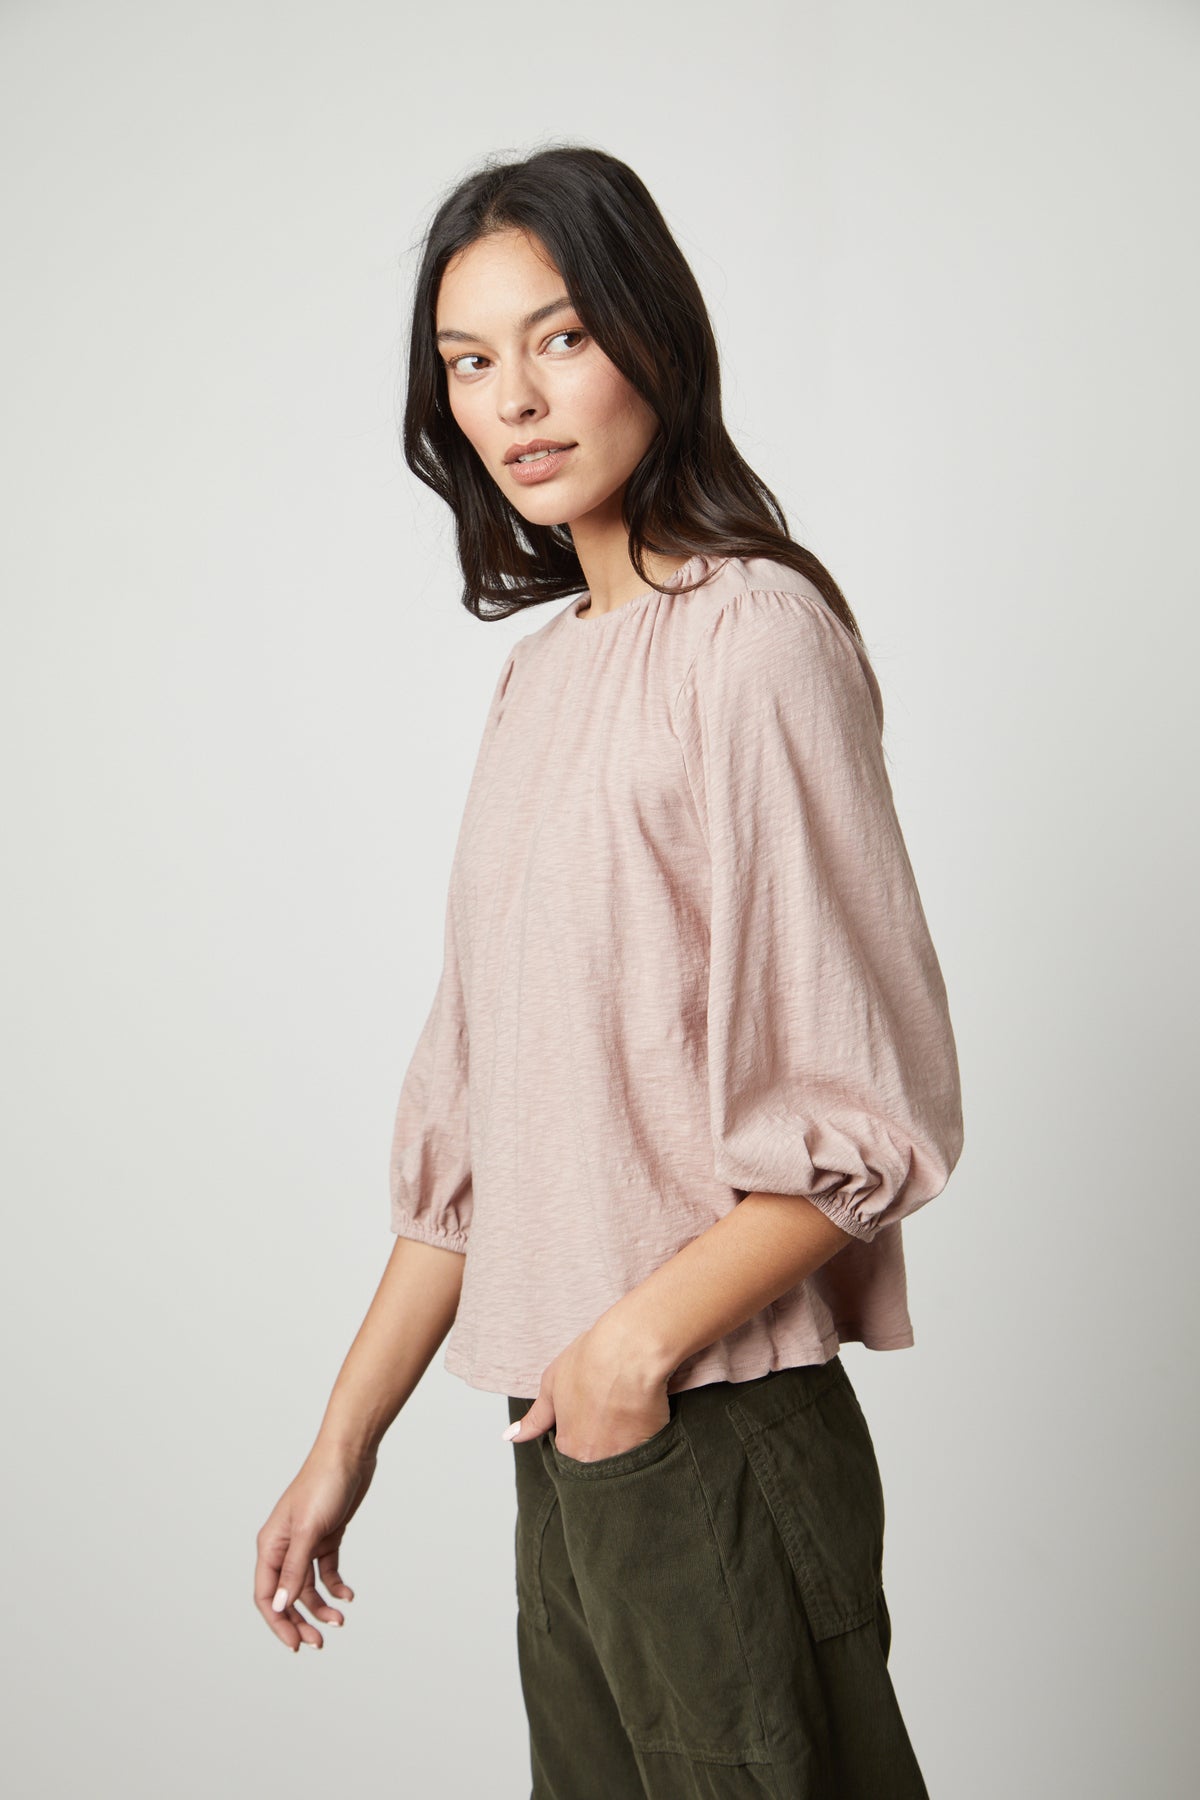   The model is wearing a Velvet by Graham & Spencer JULIE 3/4 SLEEVE TEE with a ruffled sleeve. 